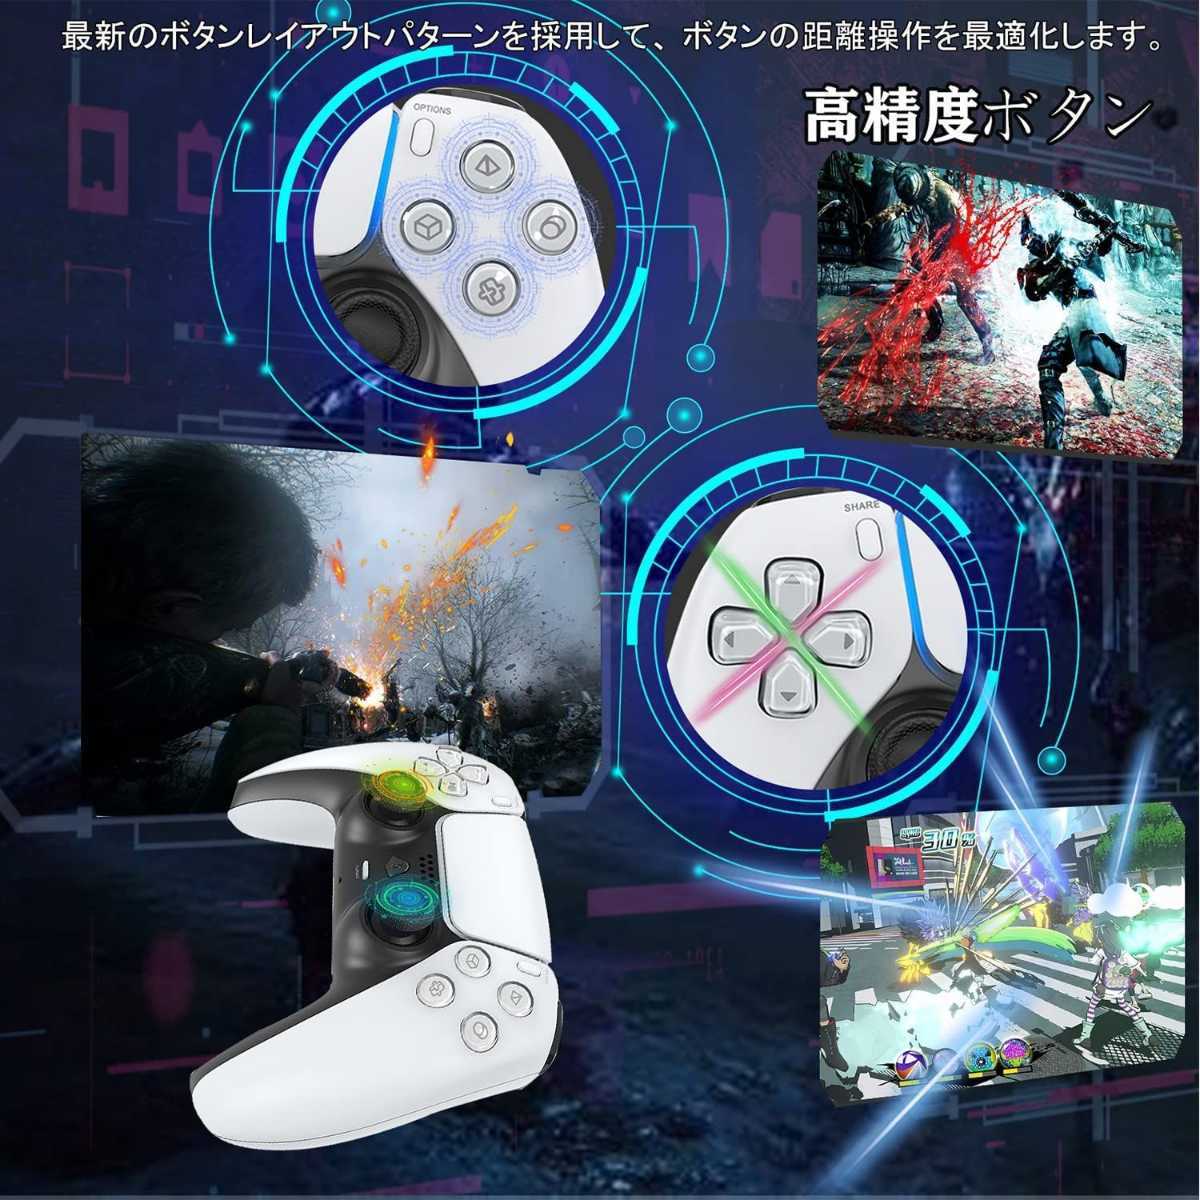 PS4用 コントローラー 無線ワイヤレス　a275